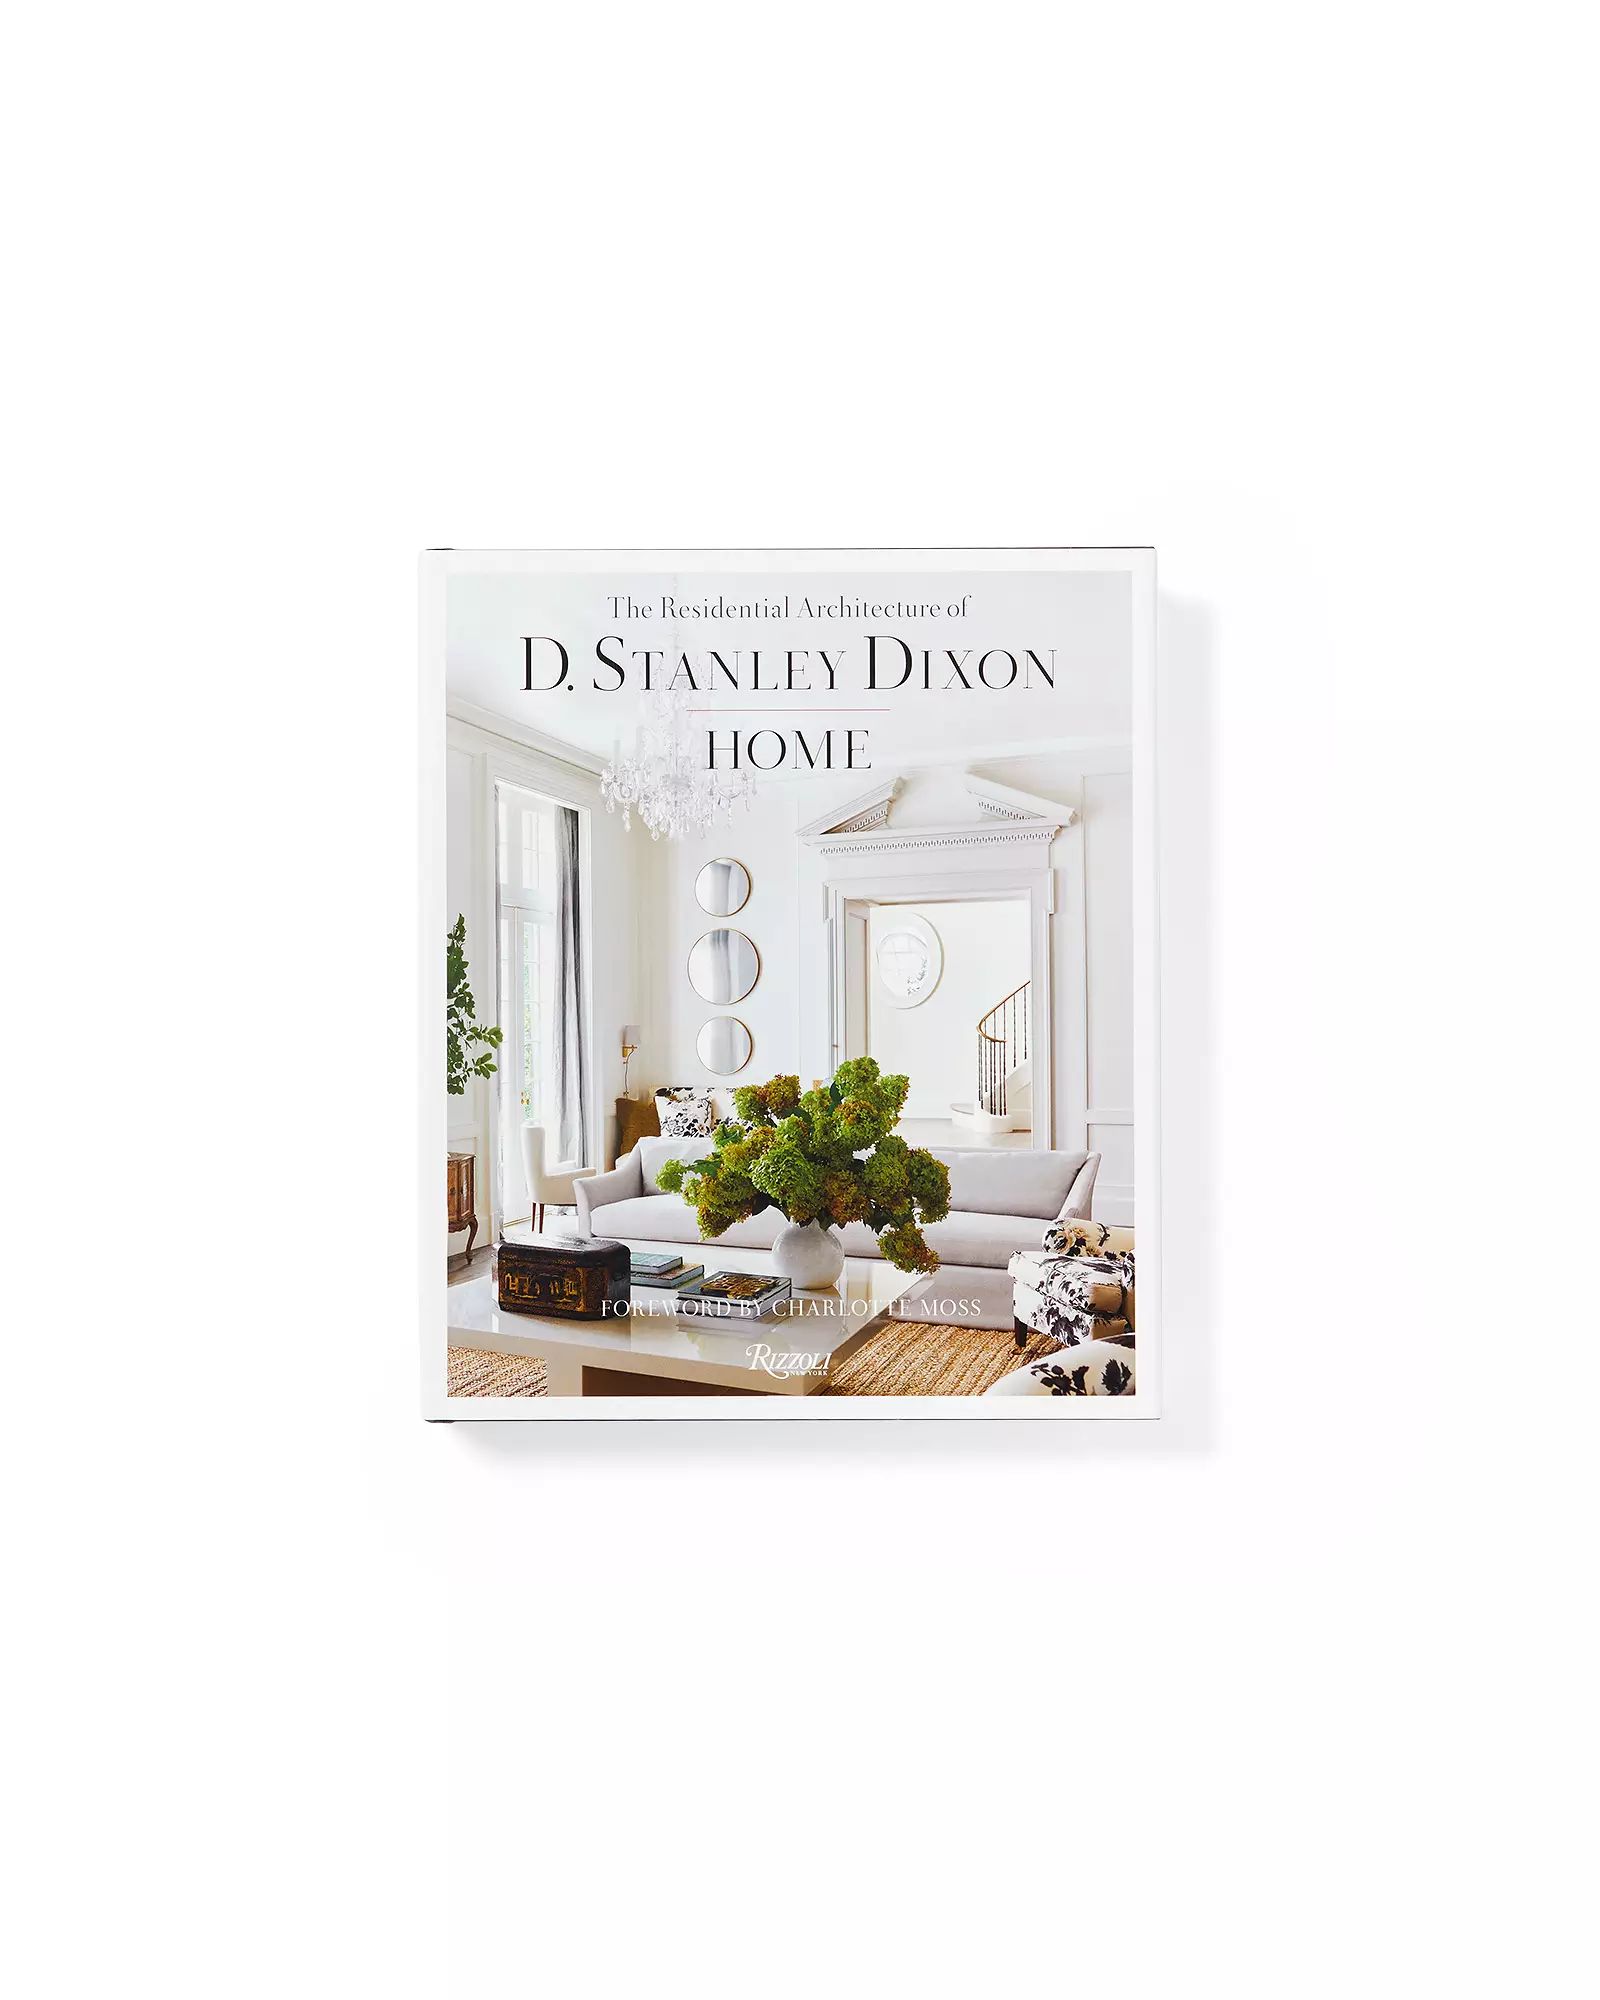 "Home: The Residential Architecture of D. Stanley Dixon" by D. Stanley Dixon | Serena and Lily